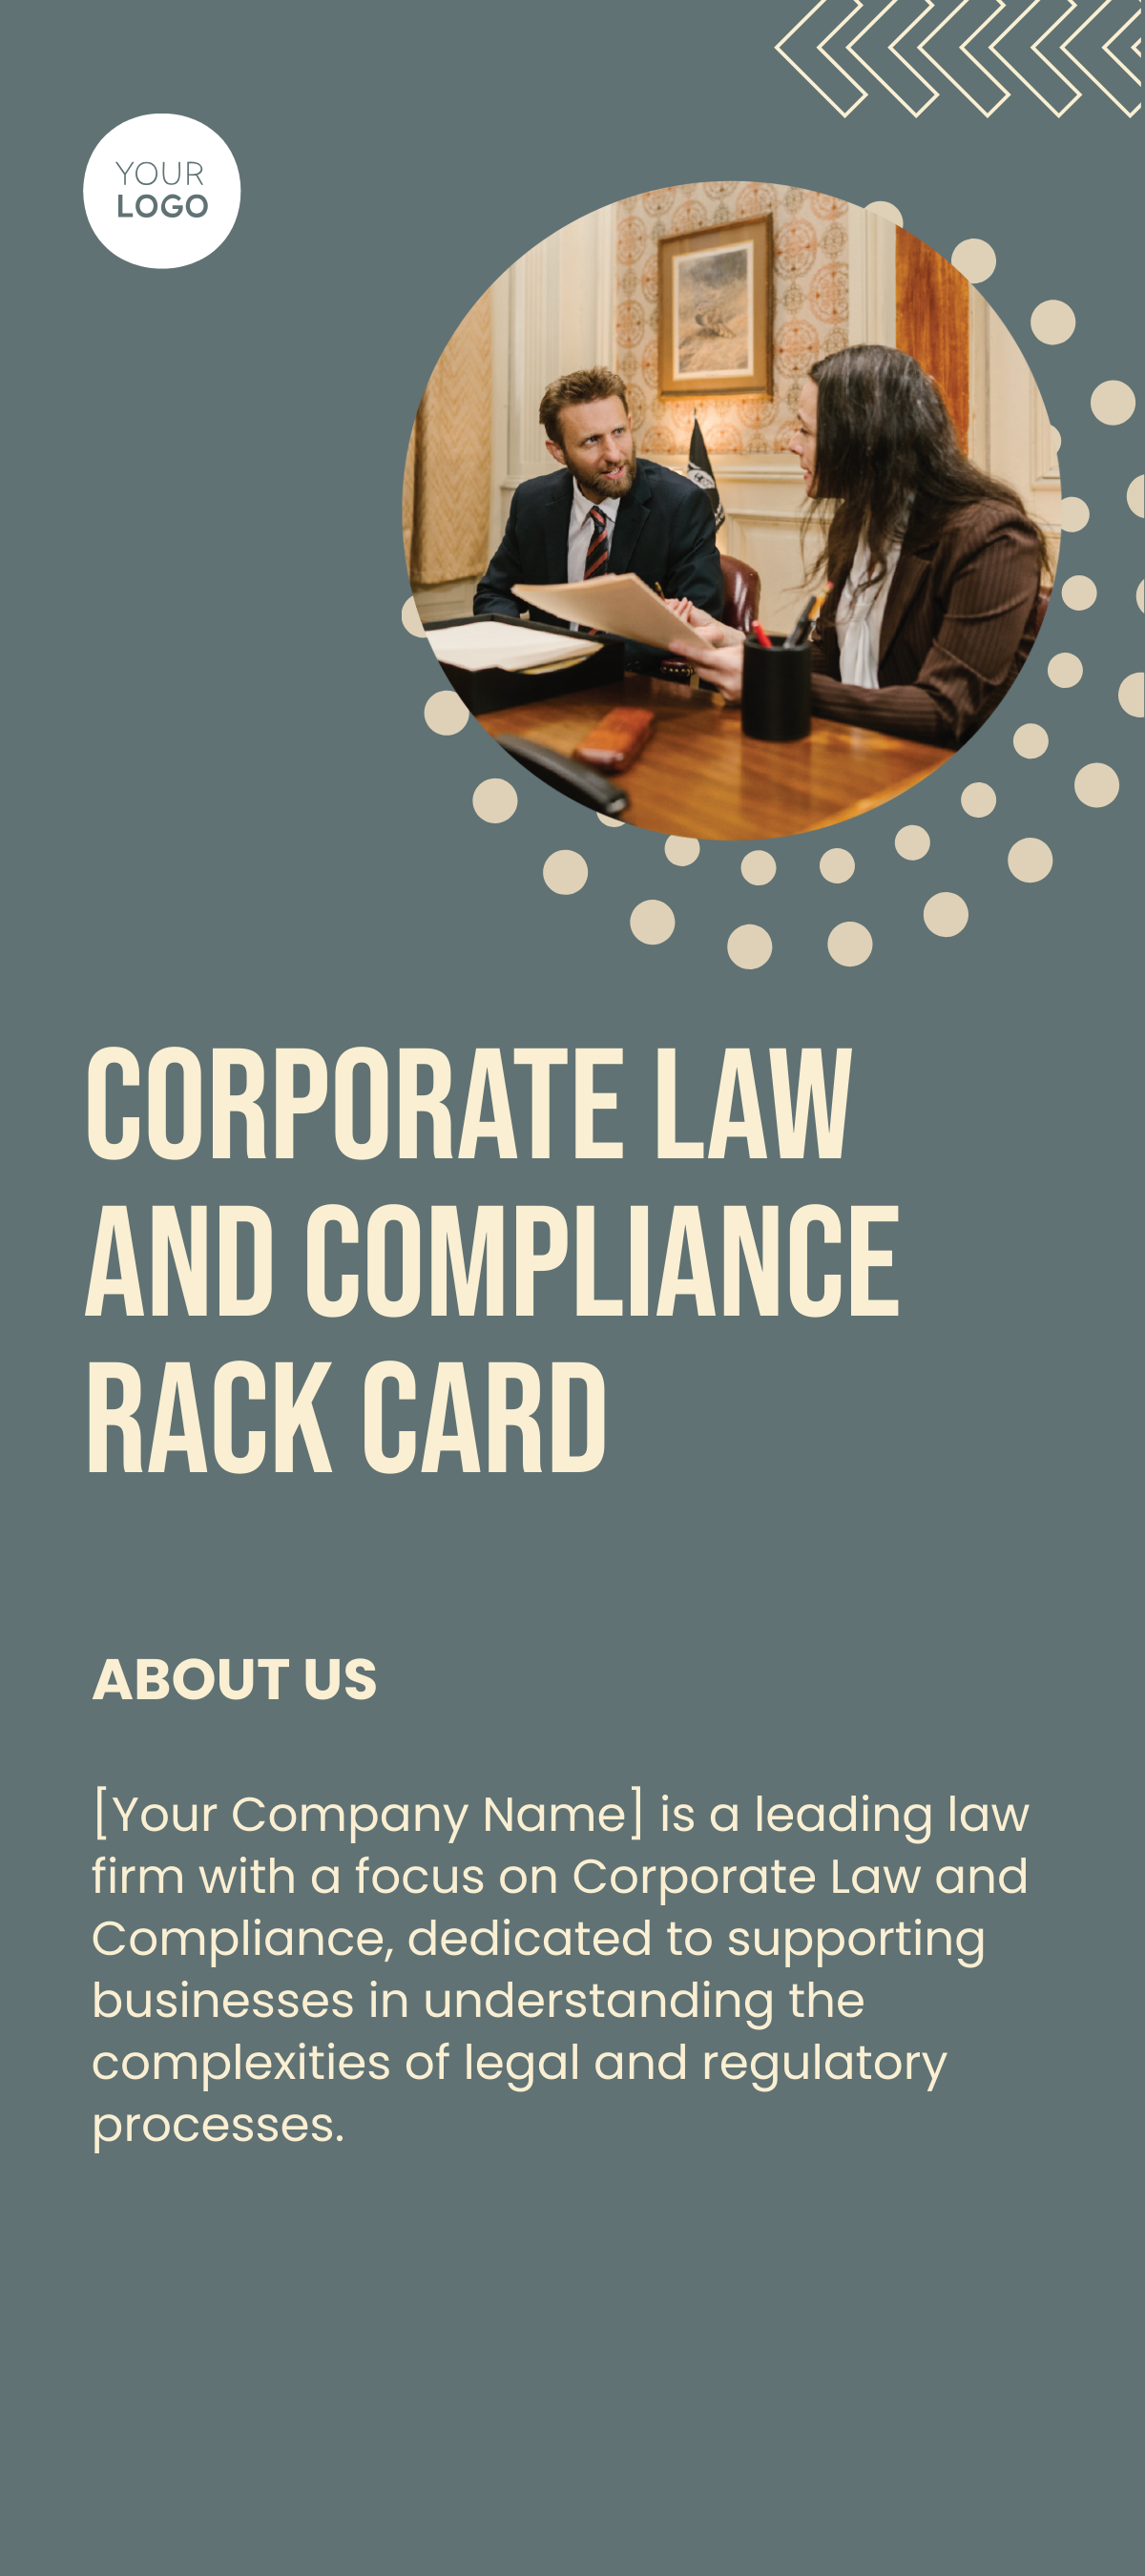 Corporate Law and Compliance Rack Card